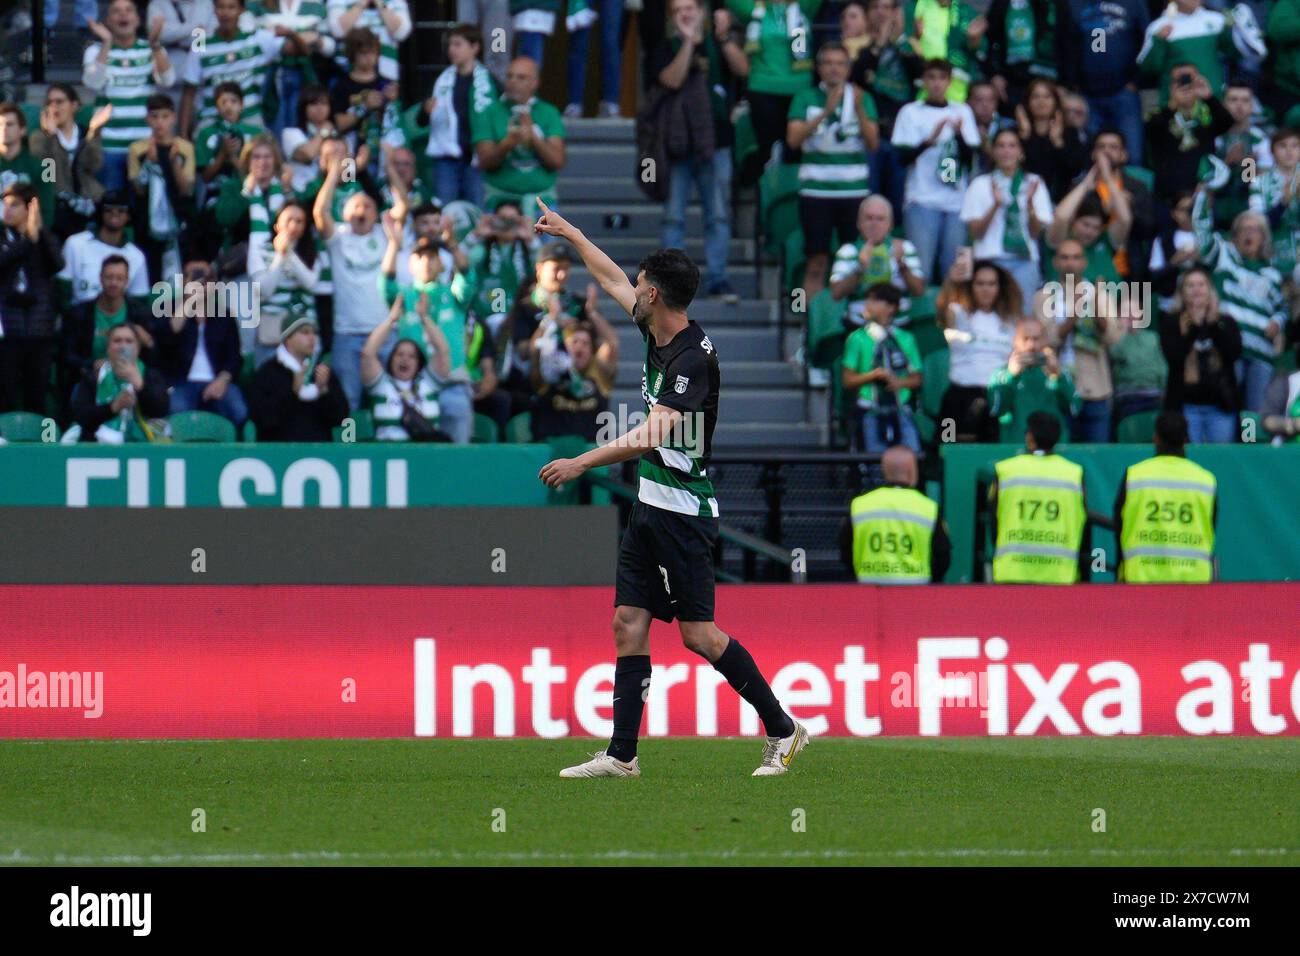 Luis Neto of Sporting CP gestures during the Liga Portugal BWIN football match between Sporting CP and GD Chaves at Estadio Jose Alvalade.Final match of Liga Portugal BWIN where Sporting CP received the trophy of Portugues League Champions. Final score: Sporting CP 3:0 GD Chaves. Stock Photo